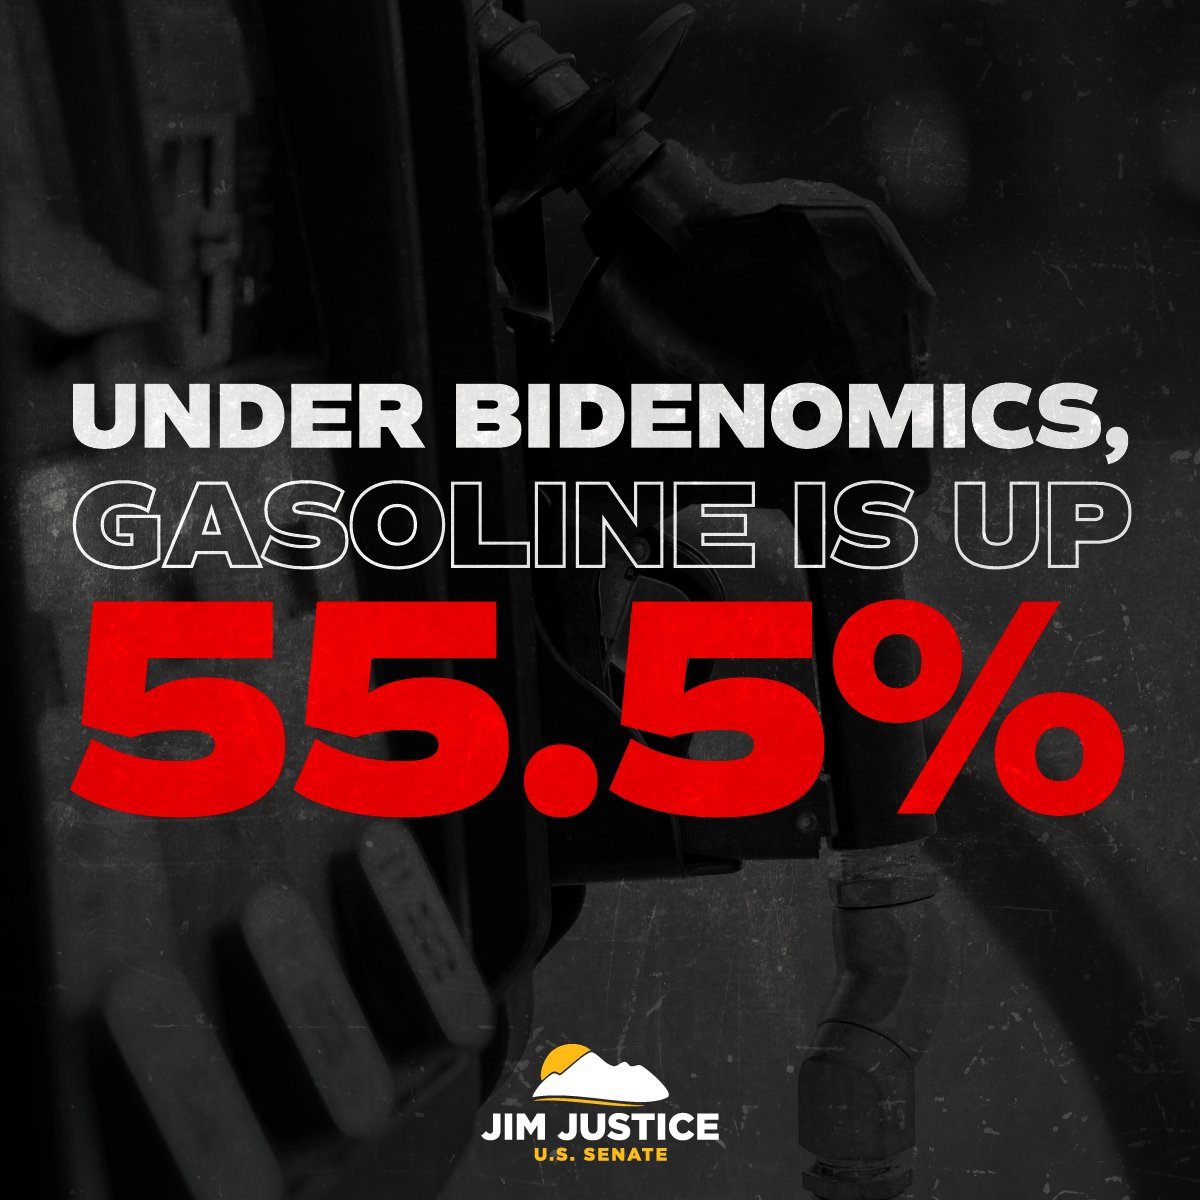 As we get ready to begin summer, gasoline prices are once again skyrocketing as a result of Joe Biden’s attacks on American energy. In the Senate, I will work with President Trump to unleash American energy and make our nation energy-independent again.